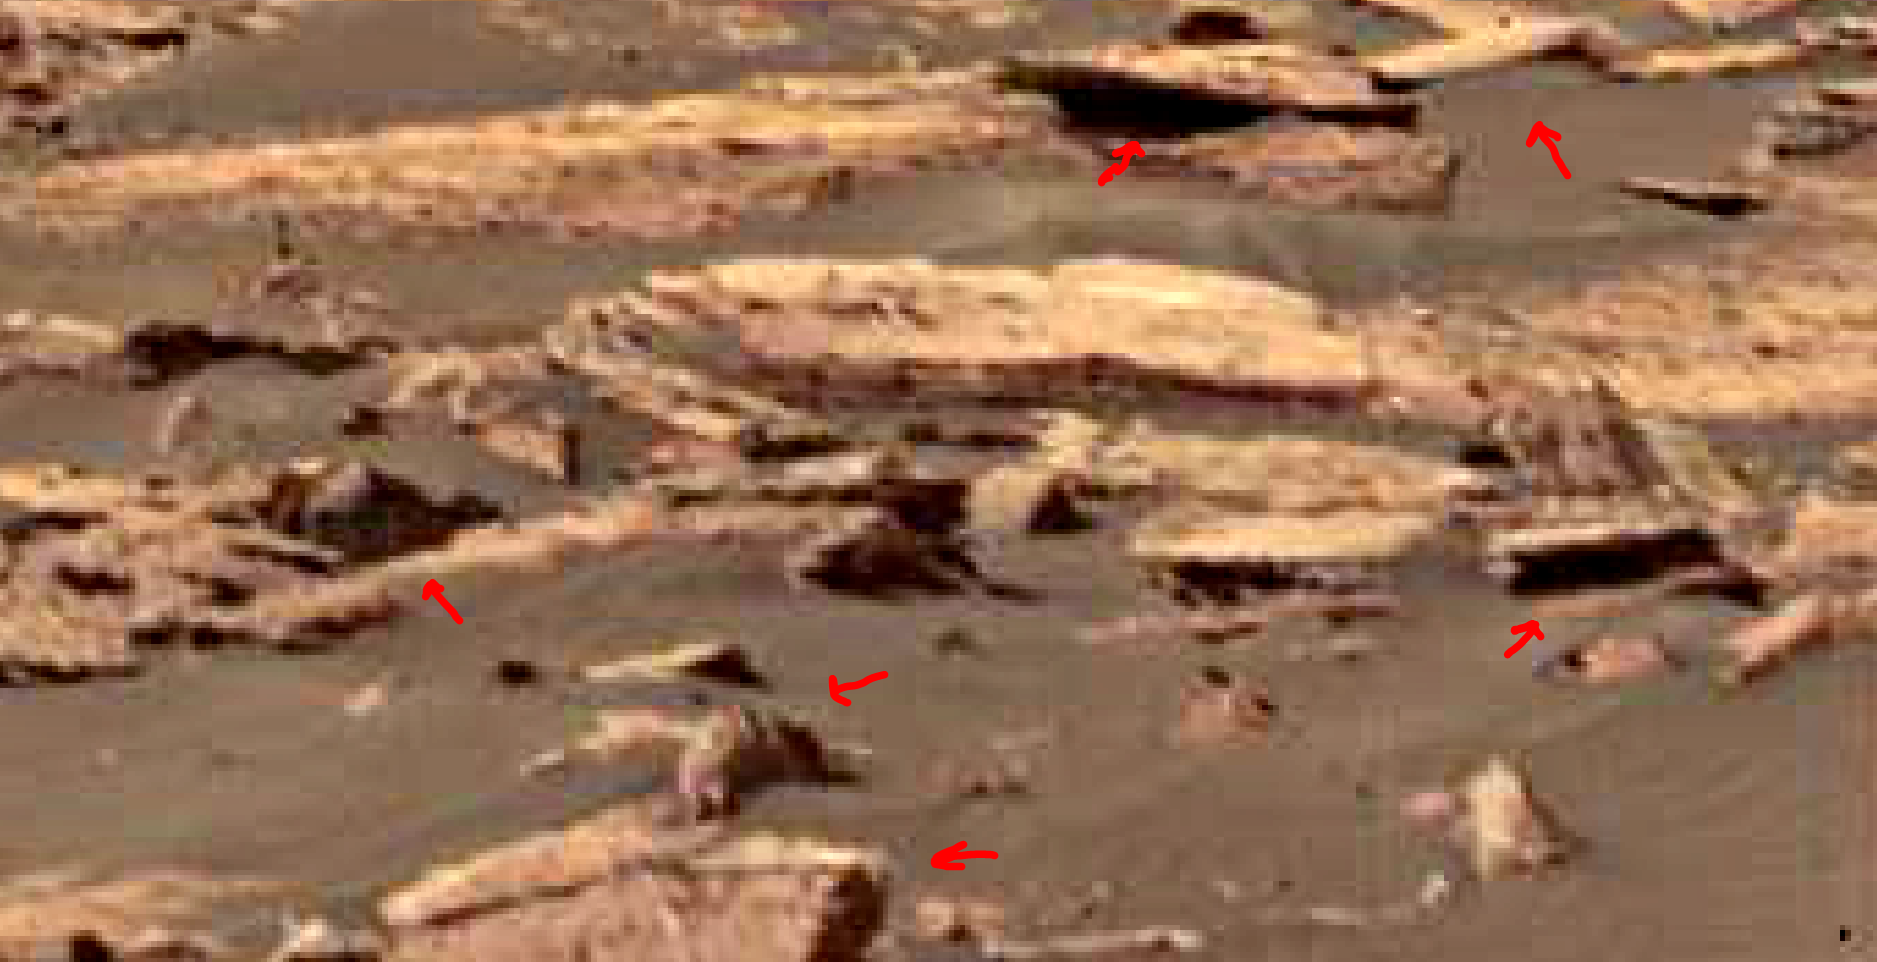 mars-sol-1507-anomaly-artifacts-4-was-life-on-mars